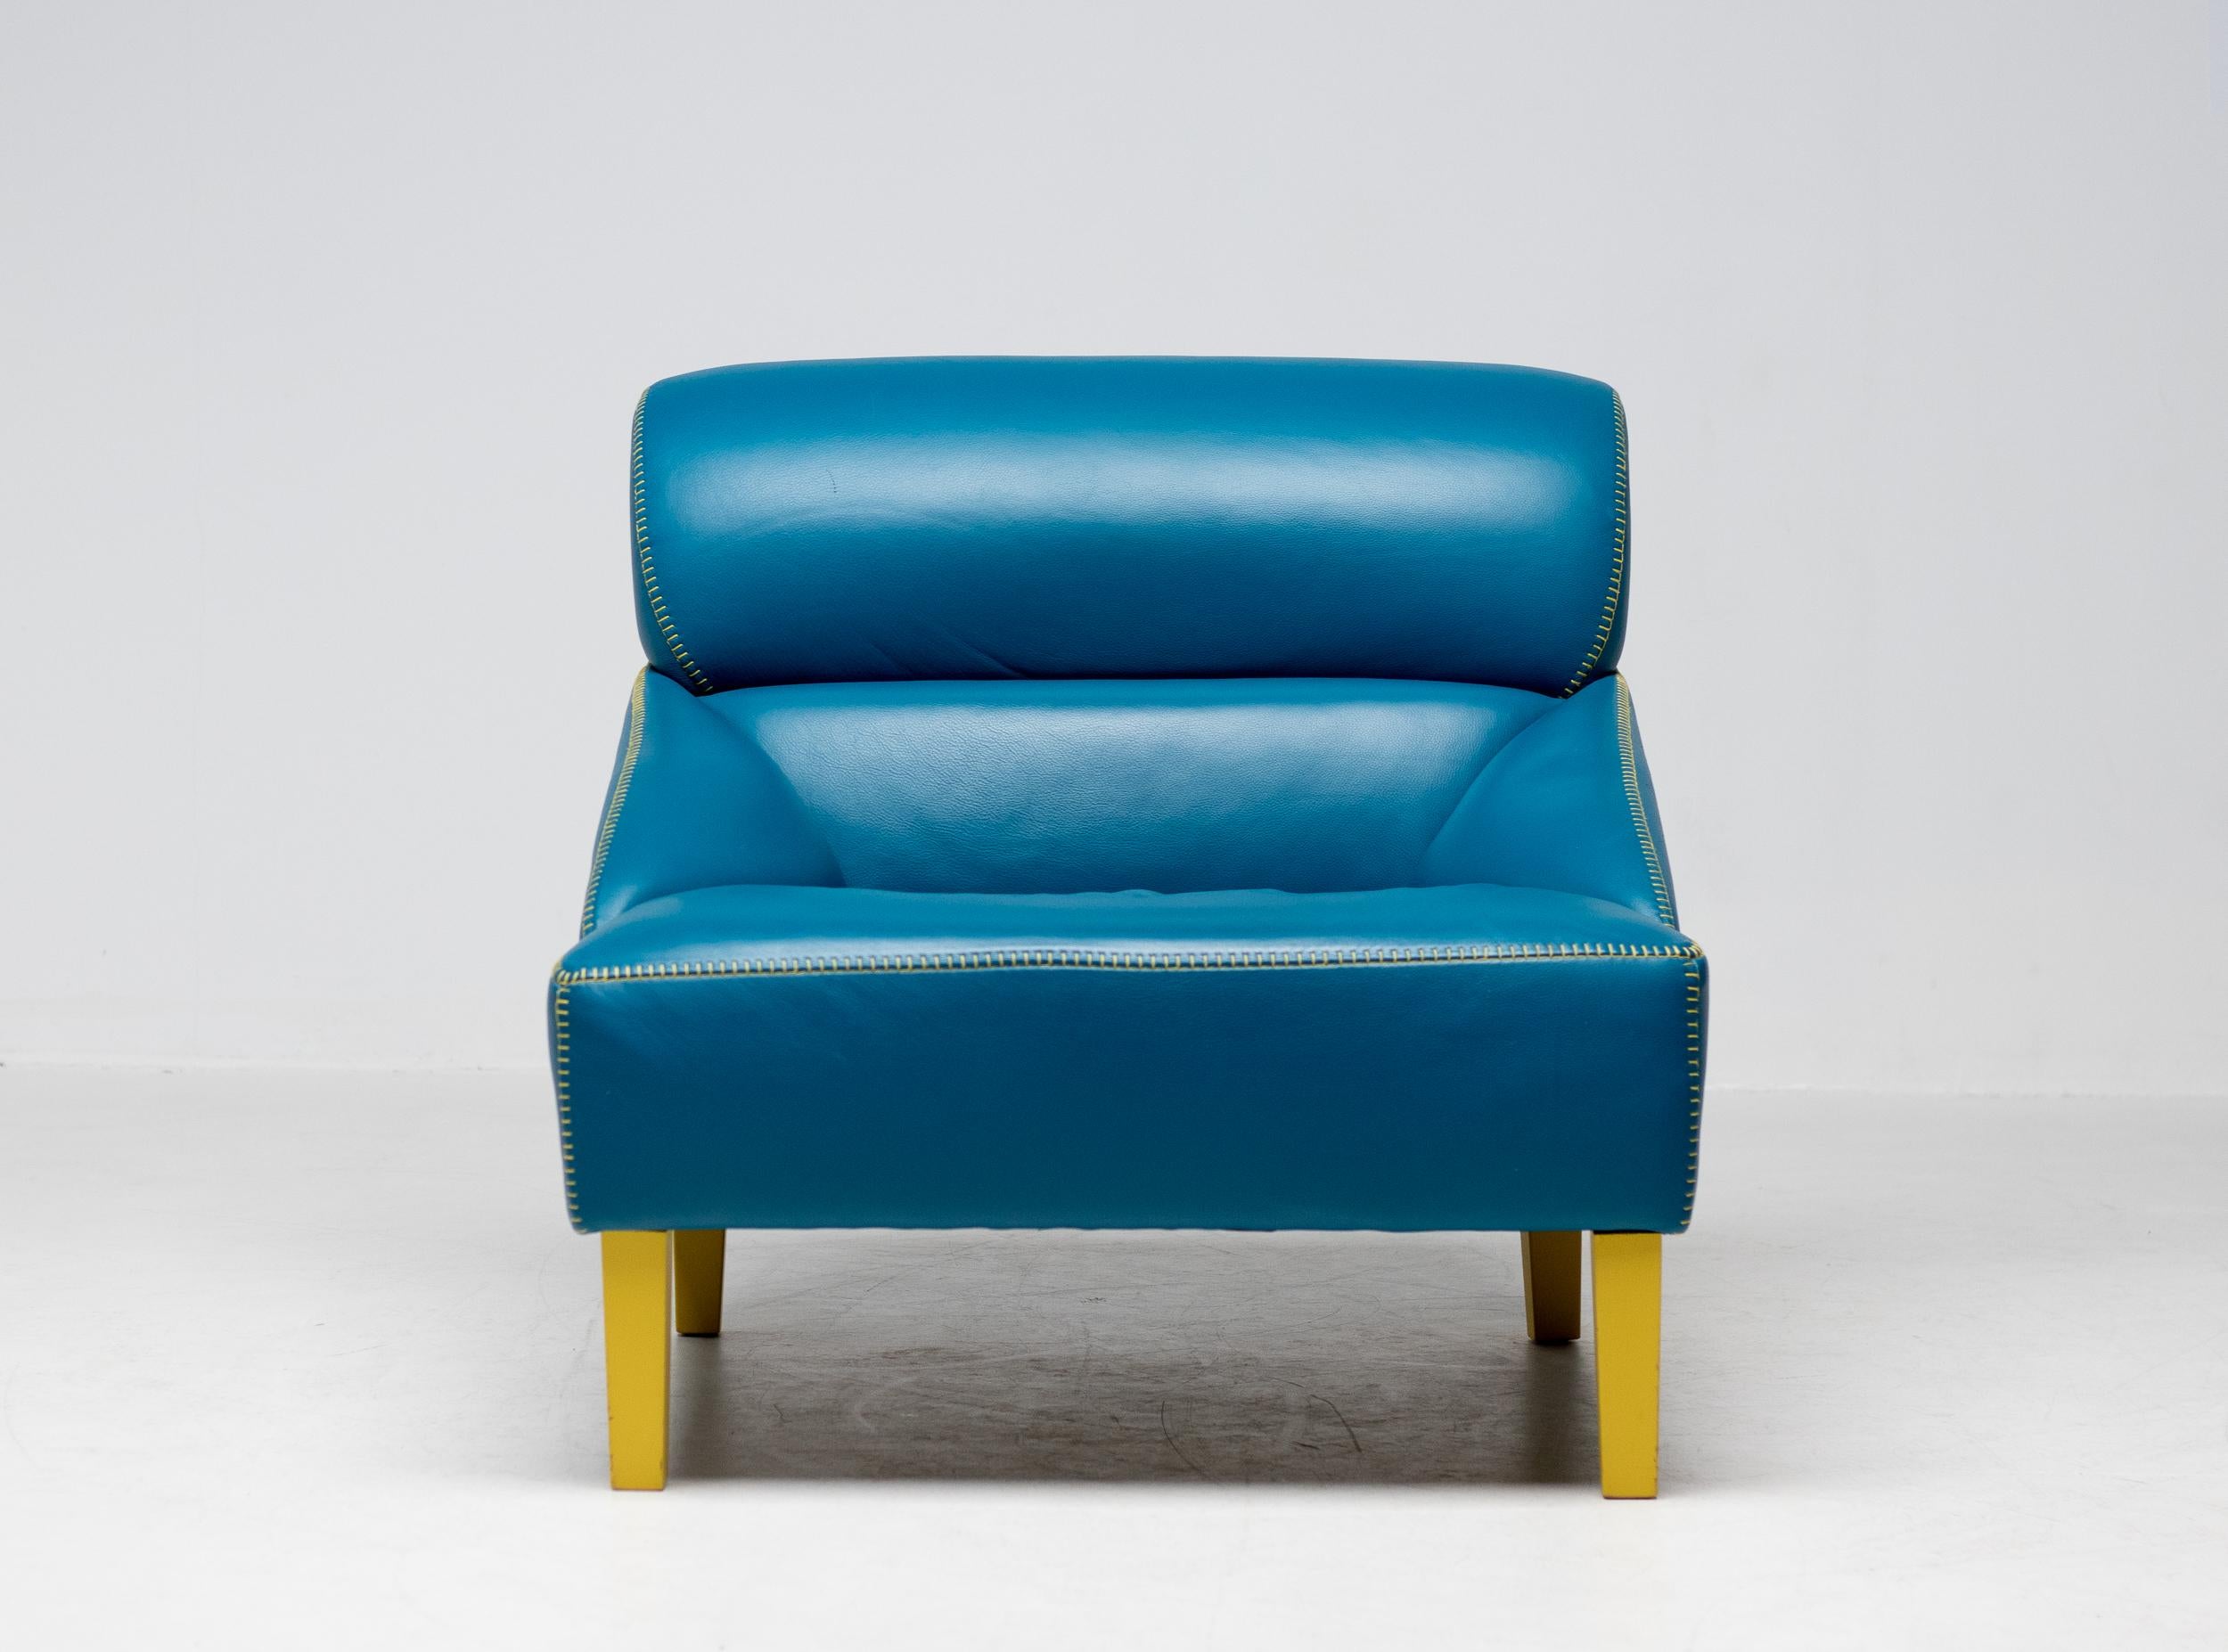 Turquoise leather love seat for Nicole Italia.
The choice for turquoise leather with contrasting yellow stitching and legs form an attractive combination.

Founded by Nicola Palasciano, Nicole Italia has become an internationally successful